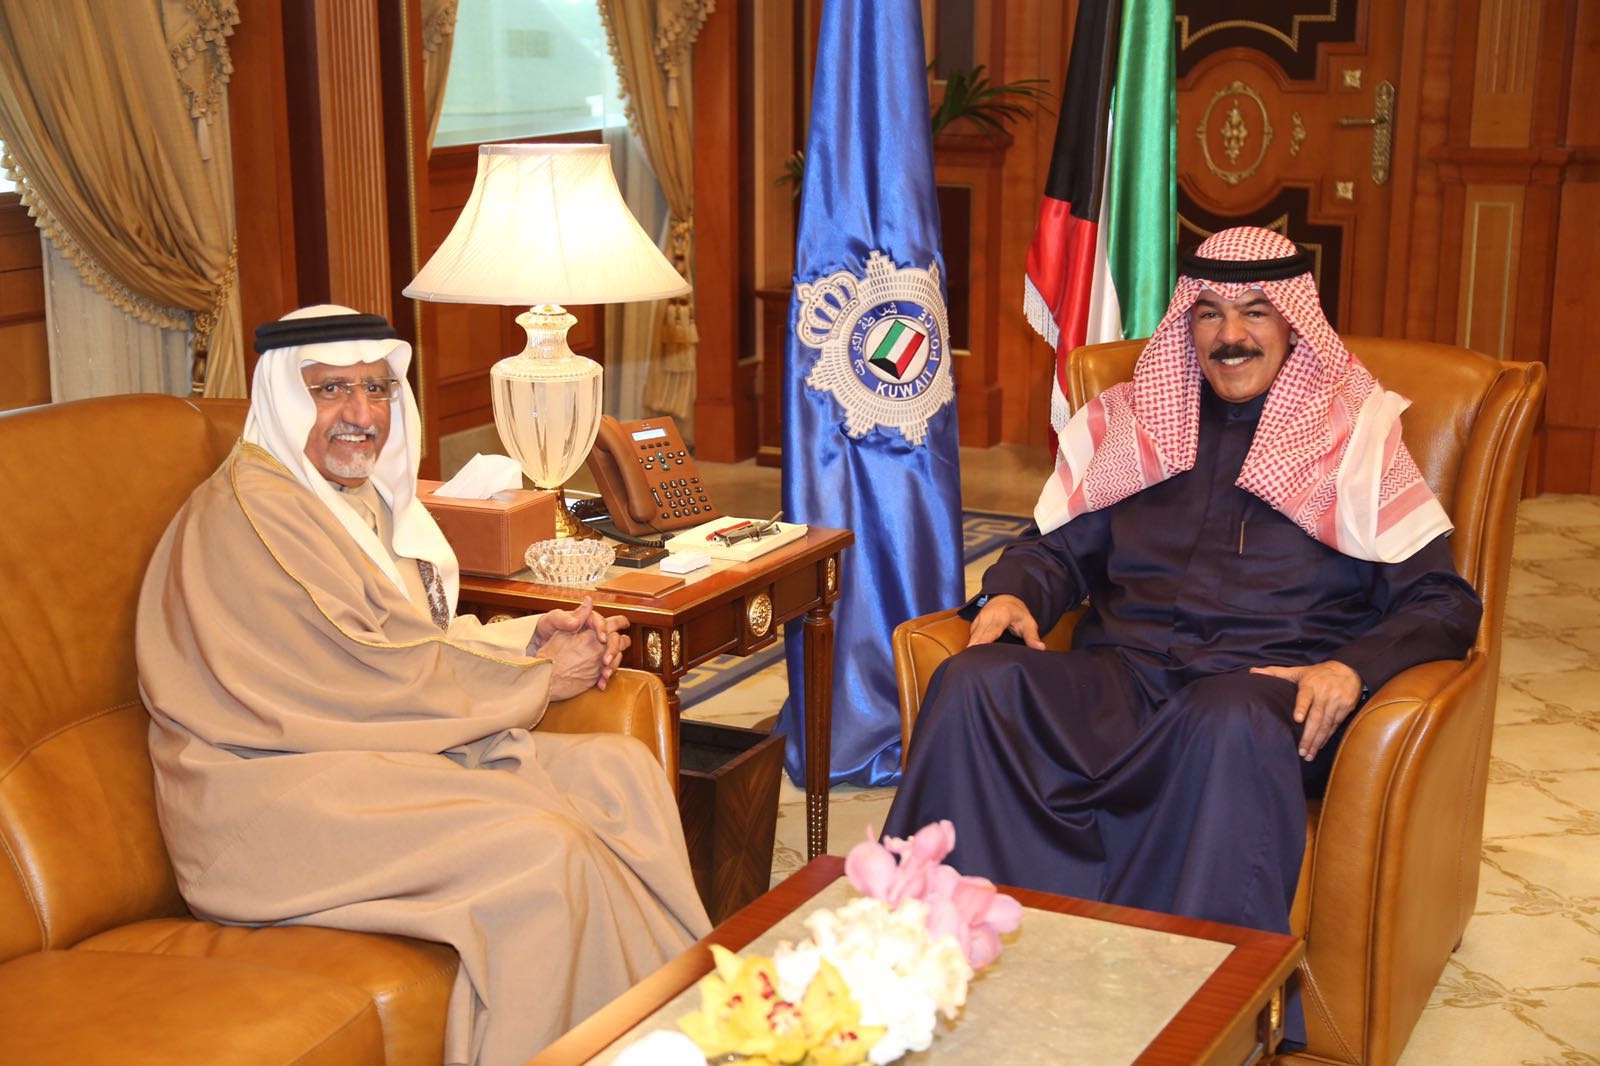 Deputy Prime Minister and Interior Minister Sheikh Mohammad Al-Khaled Al-Hamad Al-Sabah meets with Presidential Advisor of the Saudi Commission for Tourism and Antiquities Abdullah bin Mohammad Al-Sheikh